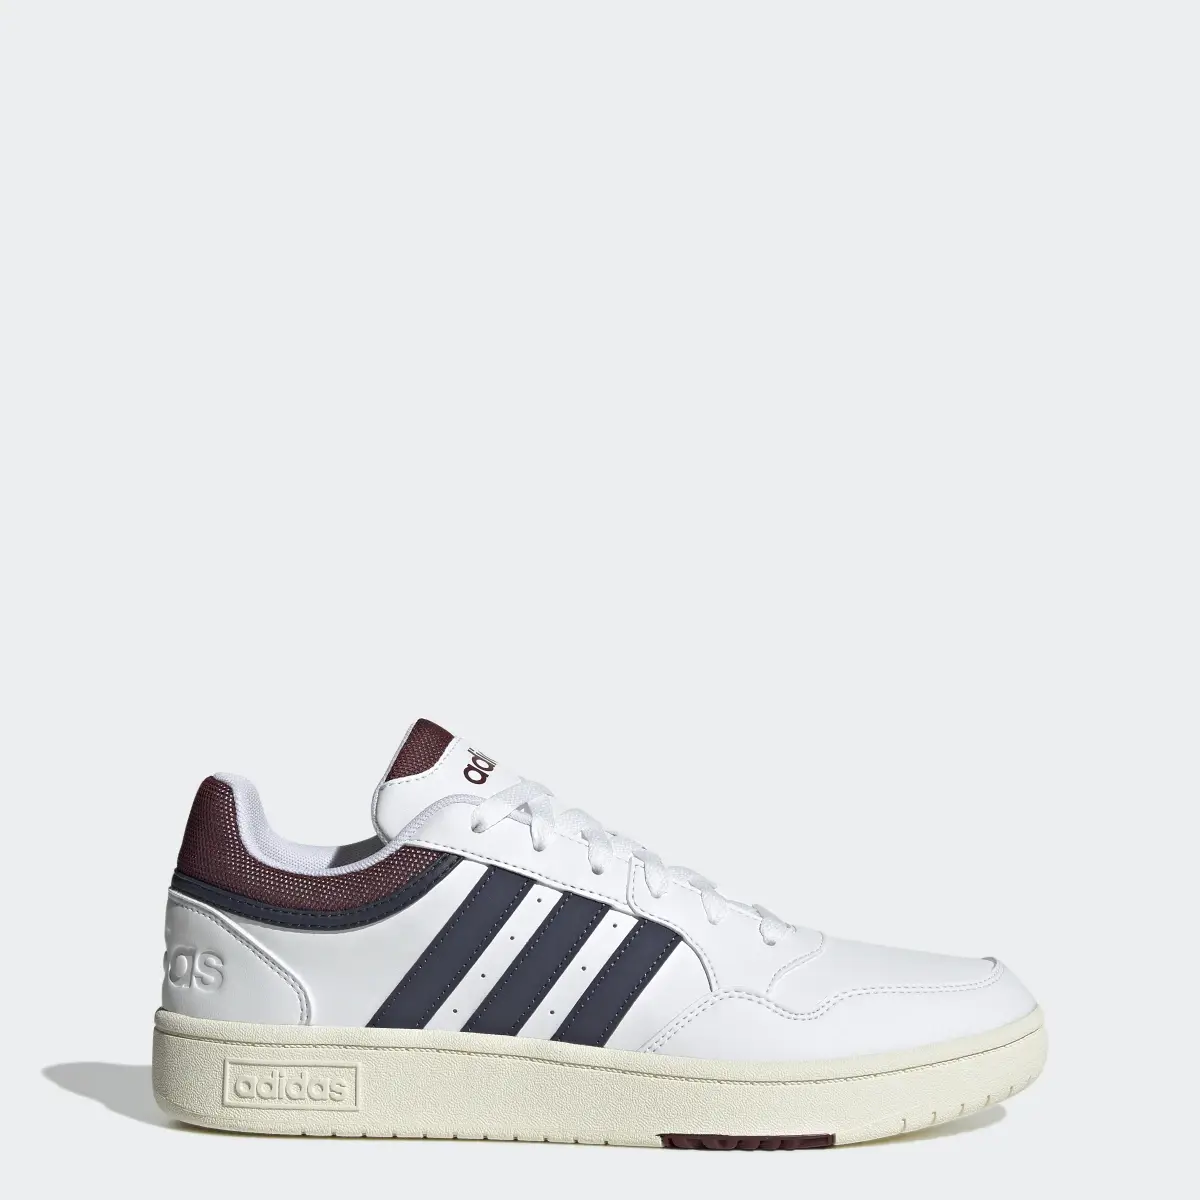 Adidas Hoops 3.0 Low Classic Vintage Shoes. 1